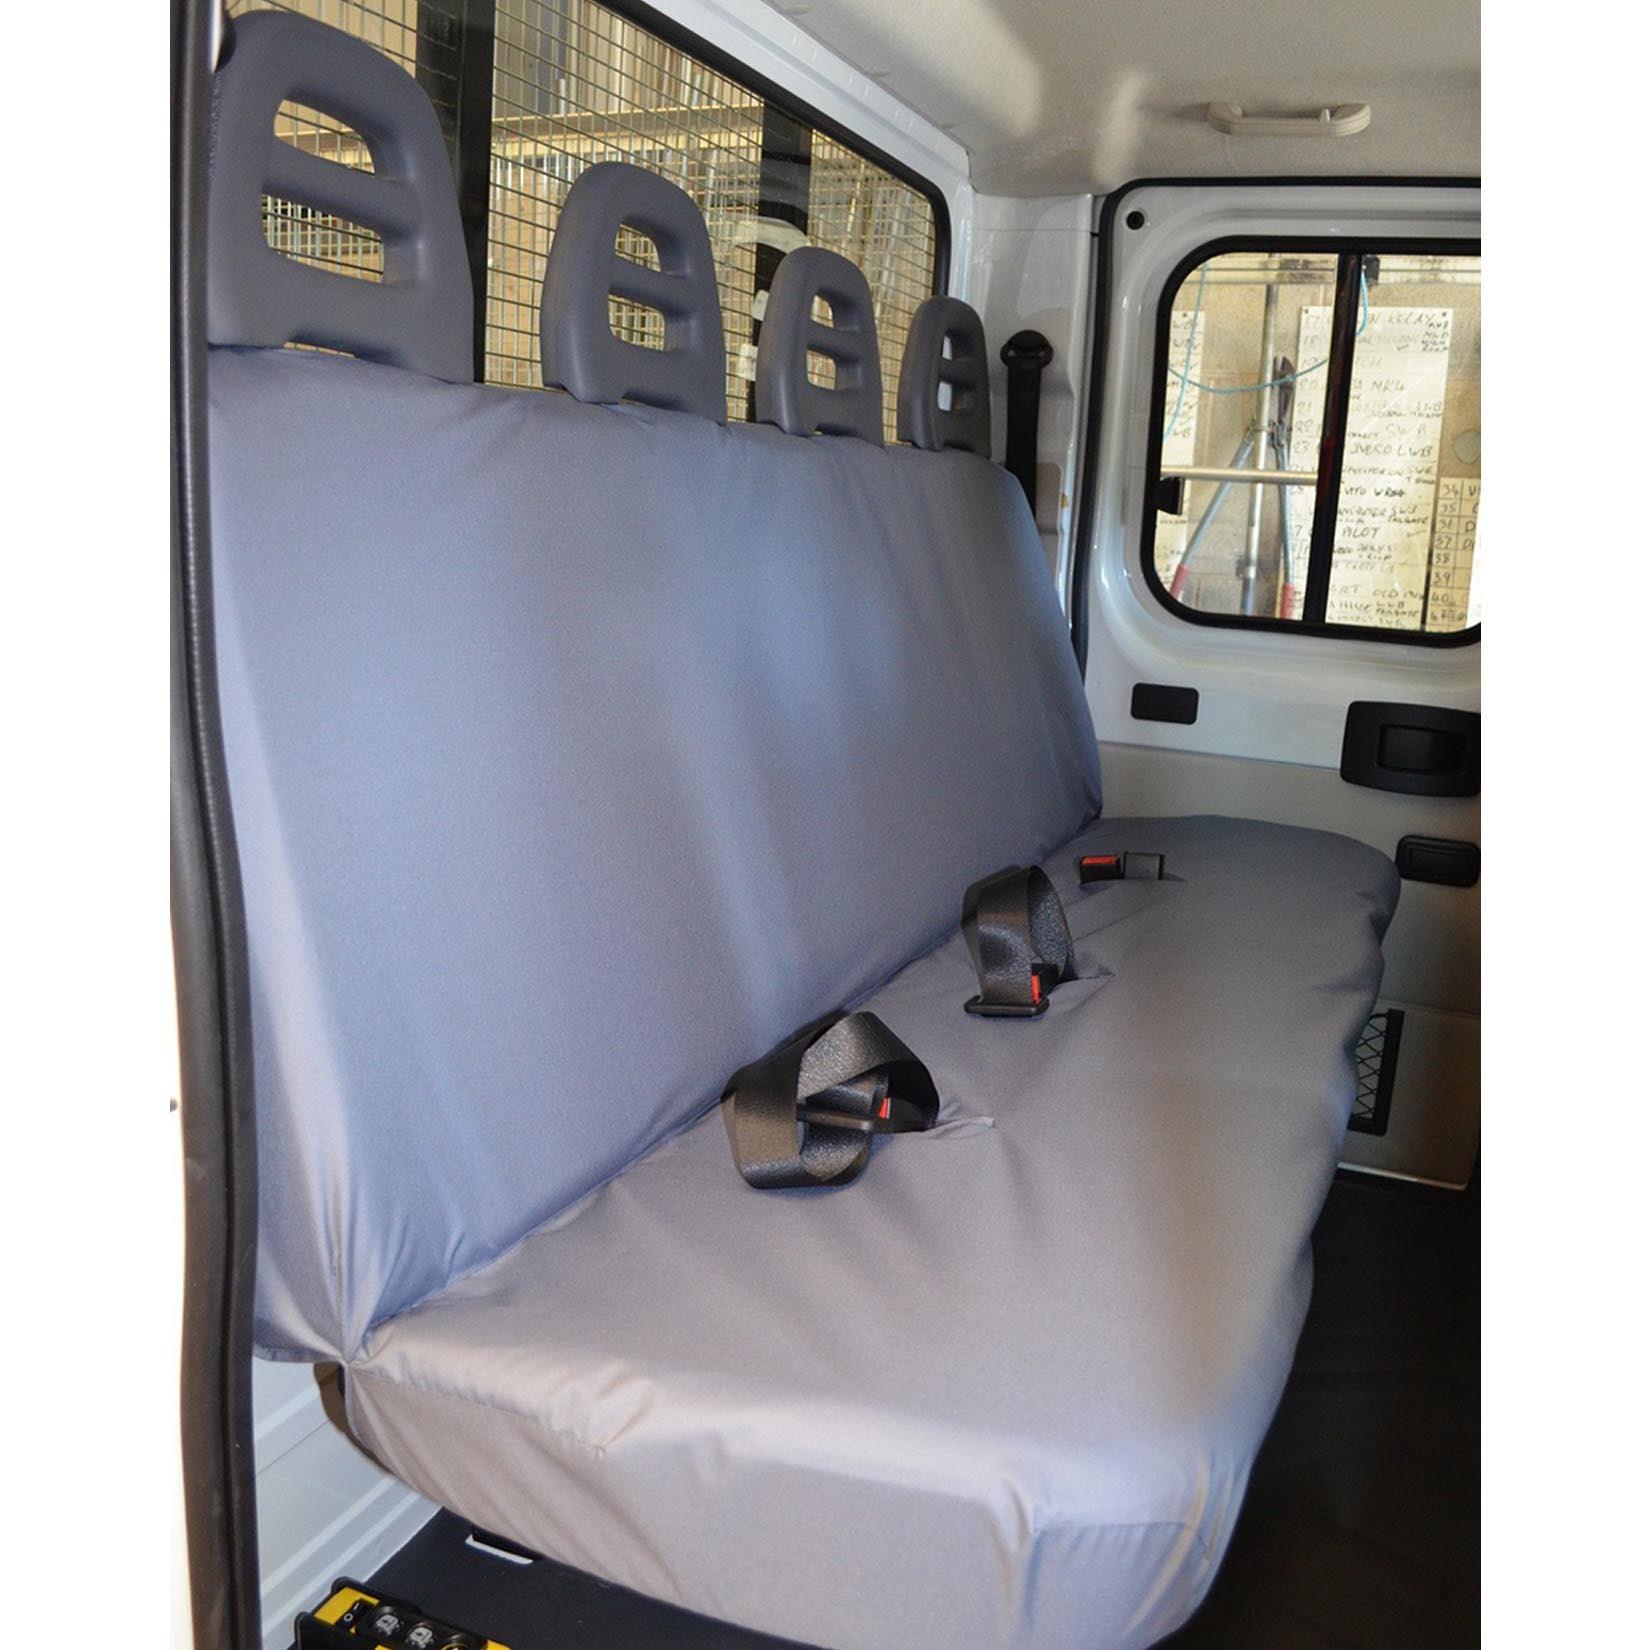 FIAT DUCATO VAN 2006 ON CHASSIS CAB REAR SEAT COVERS – GREY - Storm Xccessories2